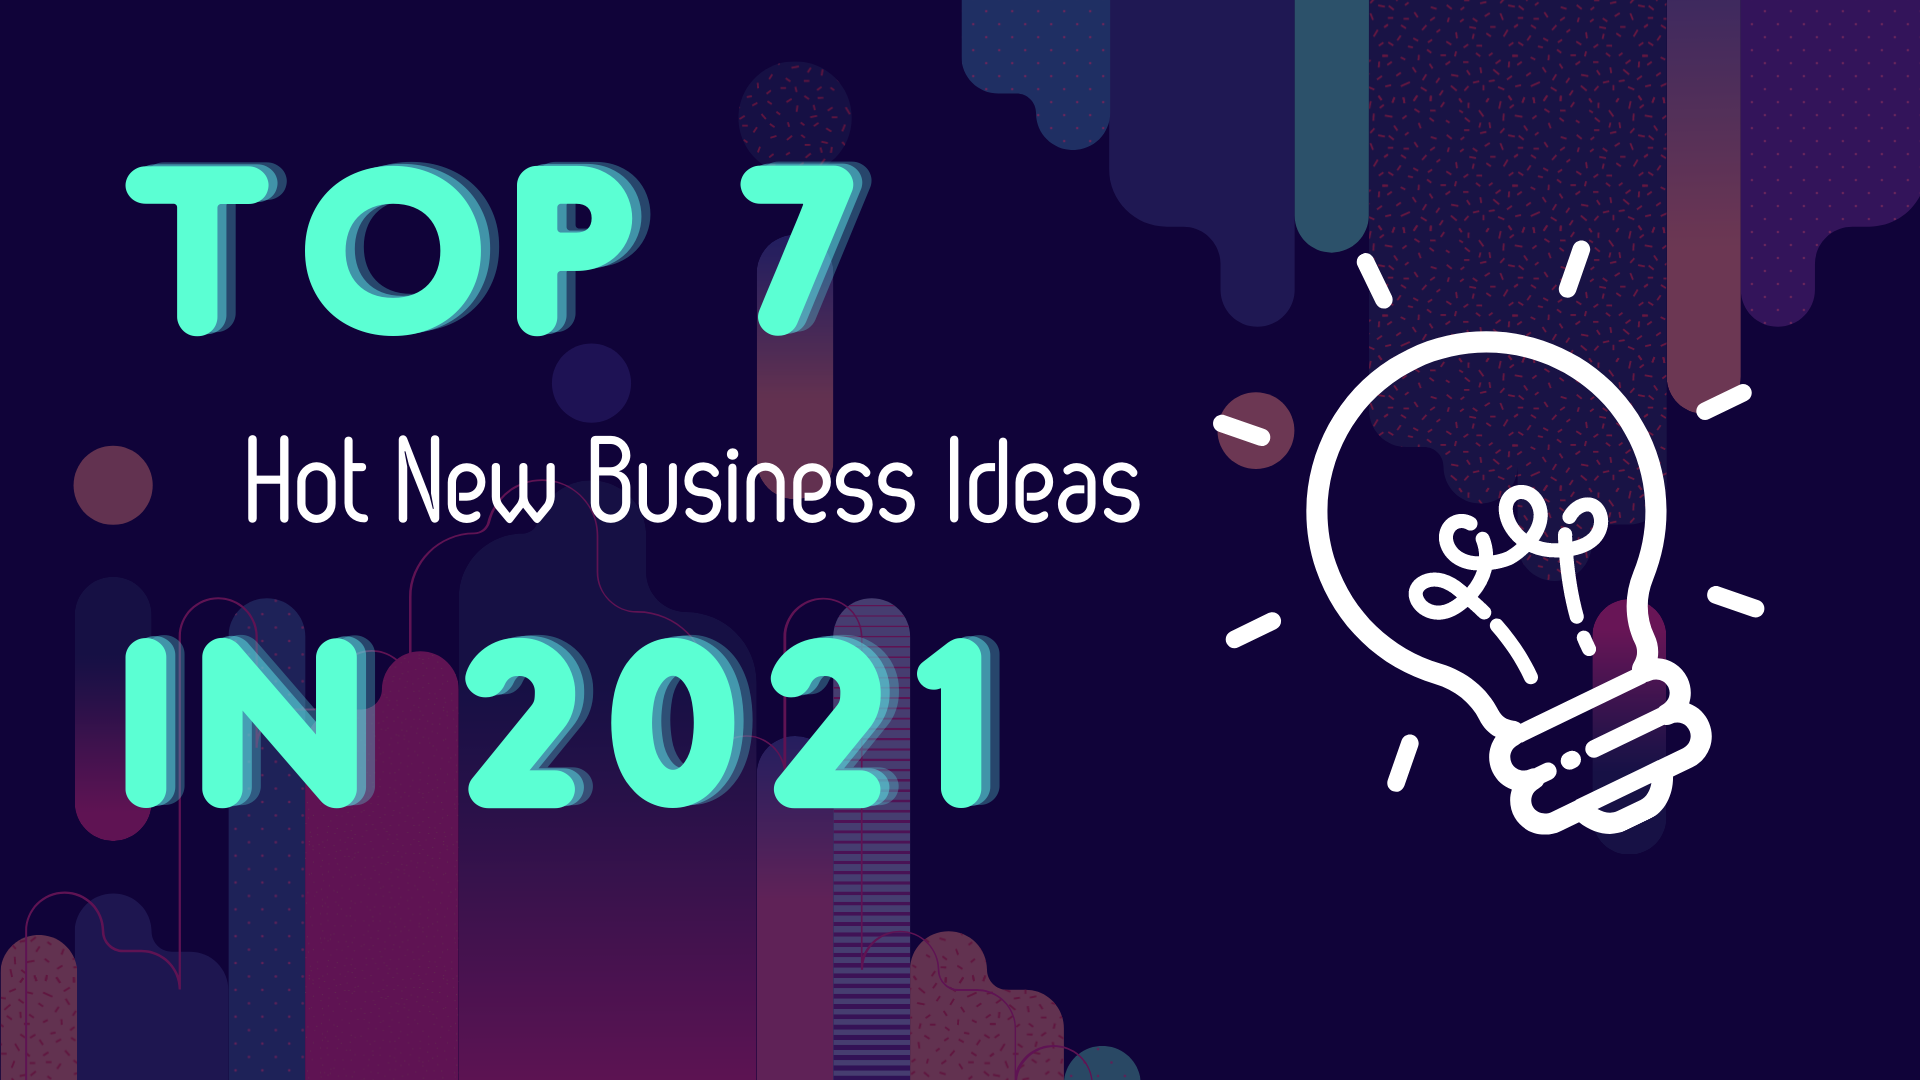 Top 7 Hot New Business Ideas in 2020